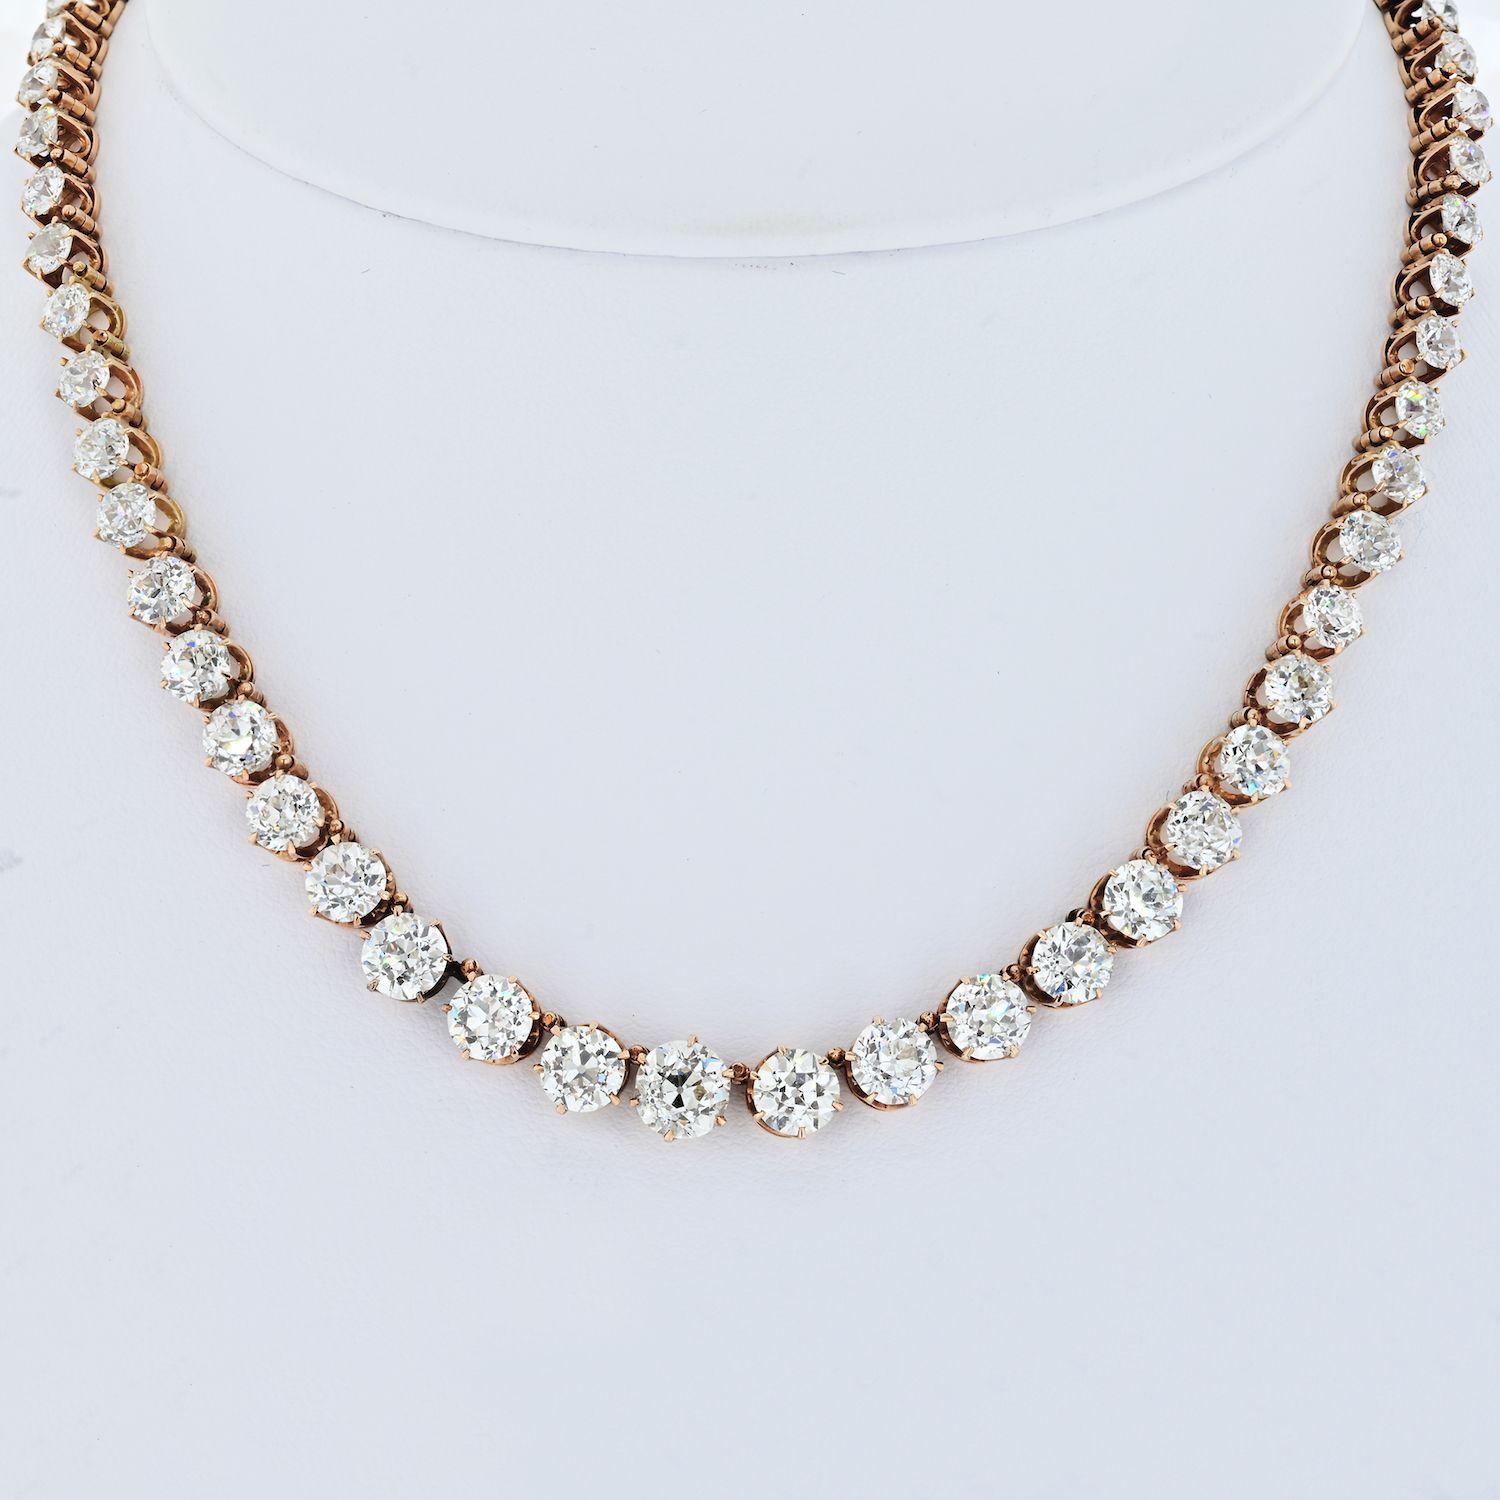 Diamond rivere necklace, mounted in rose gold baskets and connectors, composed of a single line of 64 graduated old mine cut diamonds weighing approximately 24.50 total carats, circa 1900s. With a fold down bail to accommodate a pendant or drop.